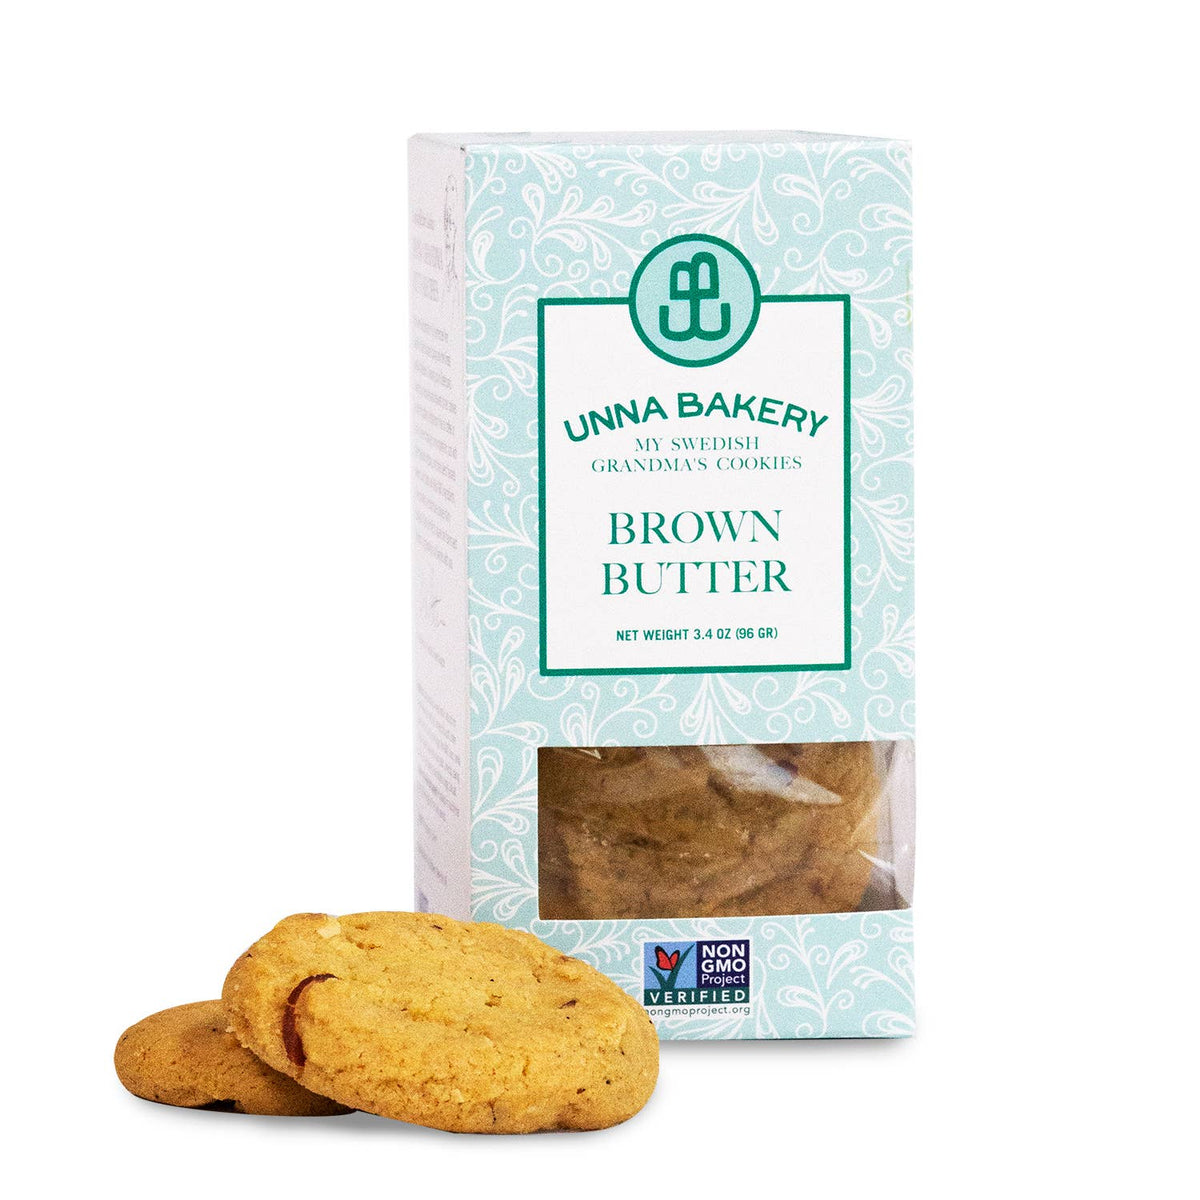 Brown Butter Cookie Box, award-winning and delicious!